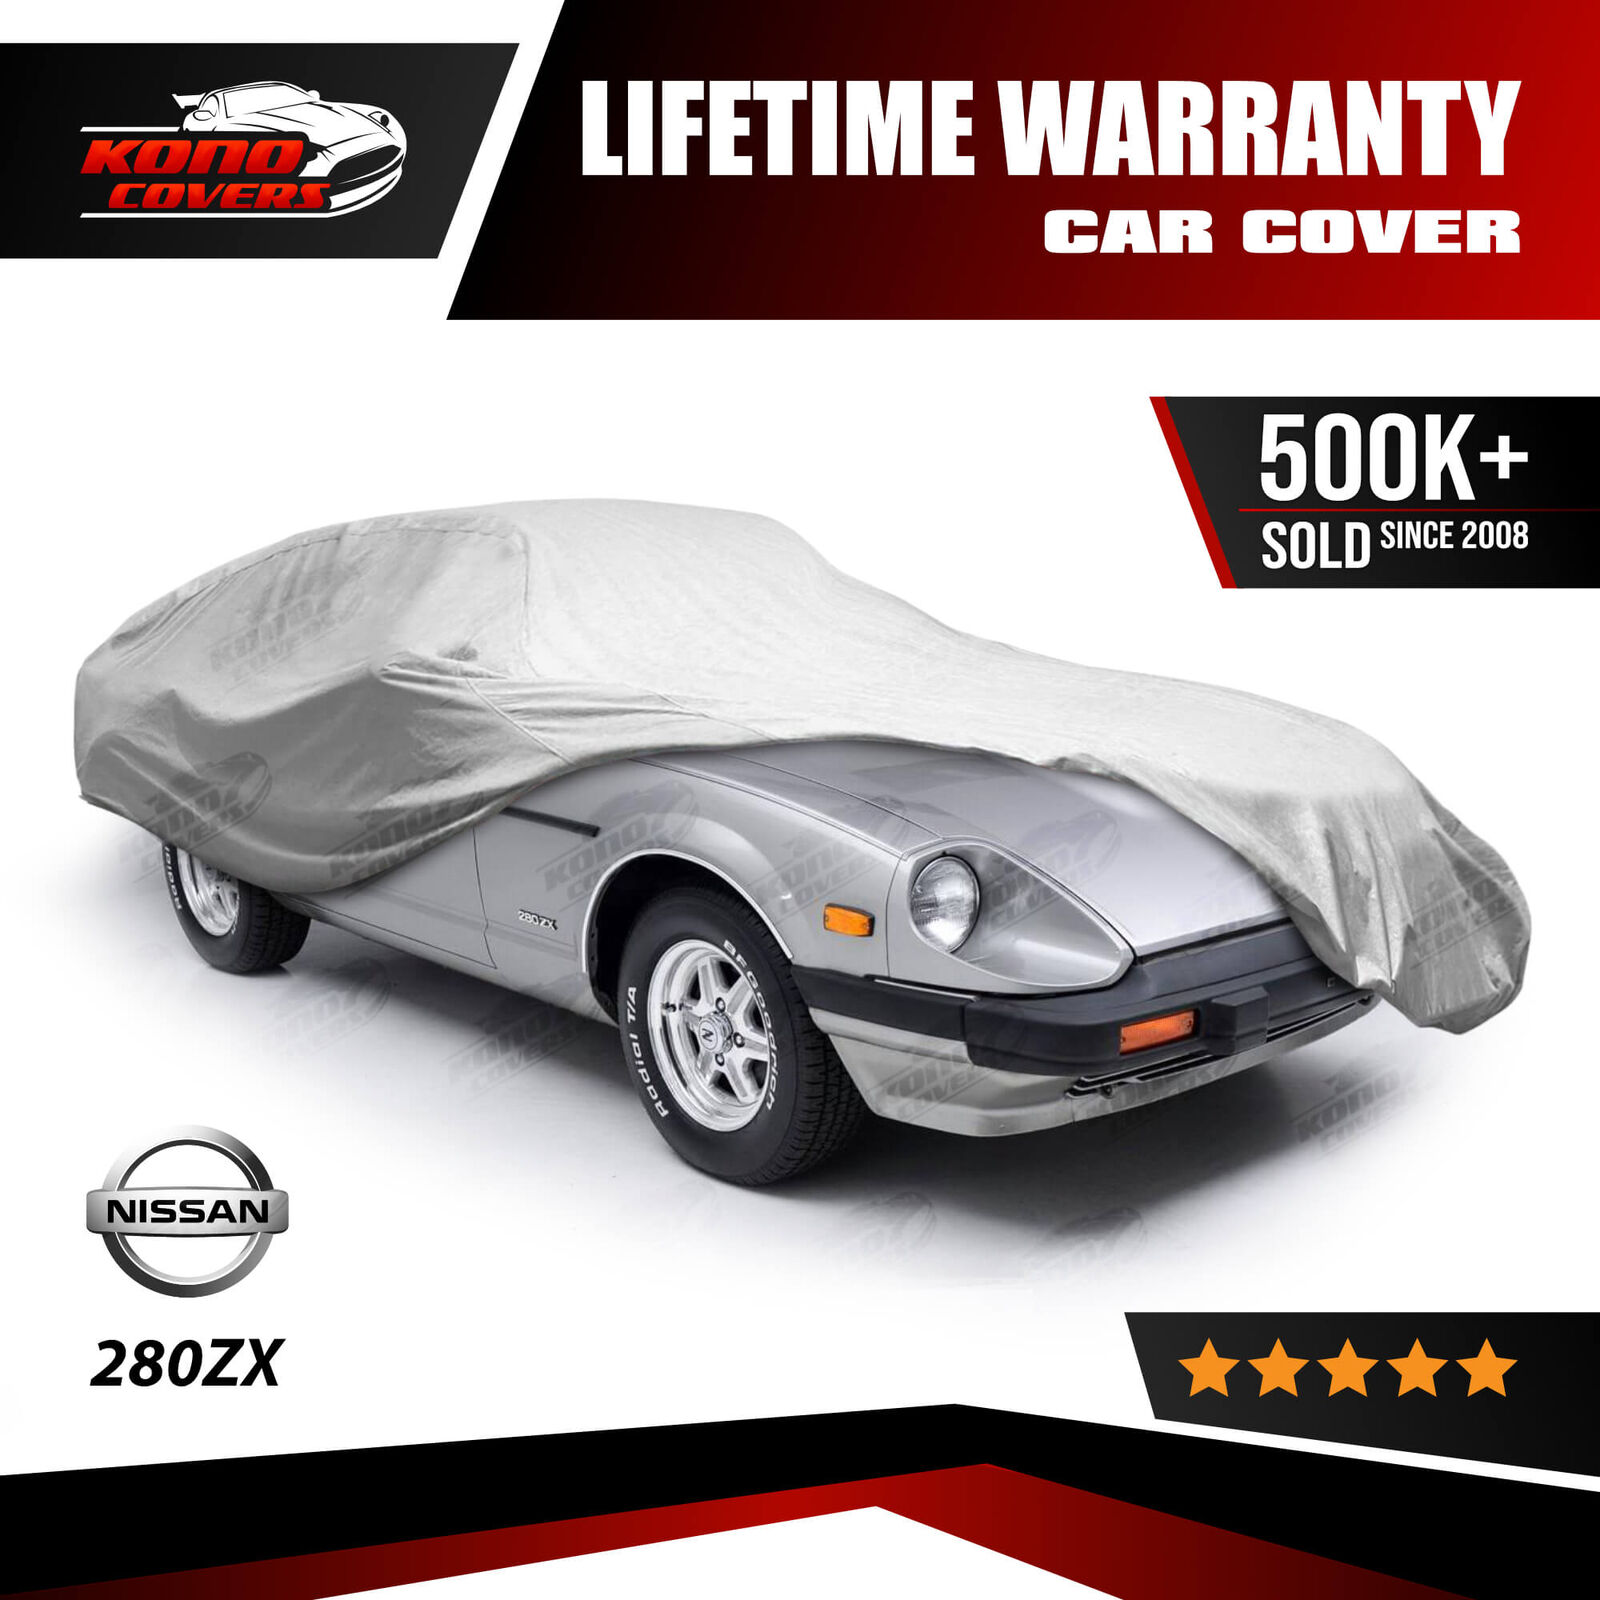 For Nissan 280Zx 4 Layer Waterproof Car Cover 1979 1980 1981 1982 1983